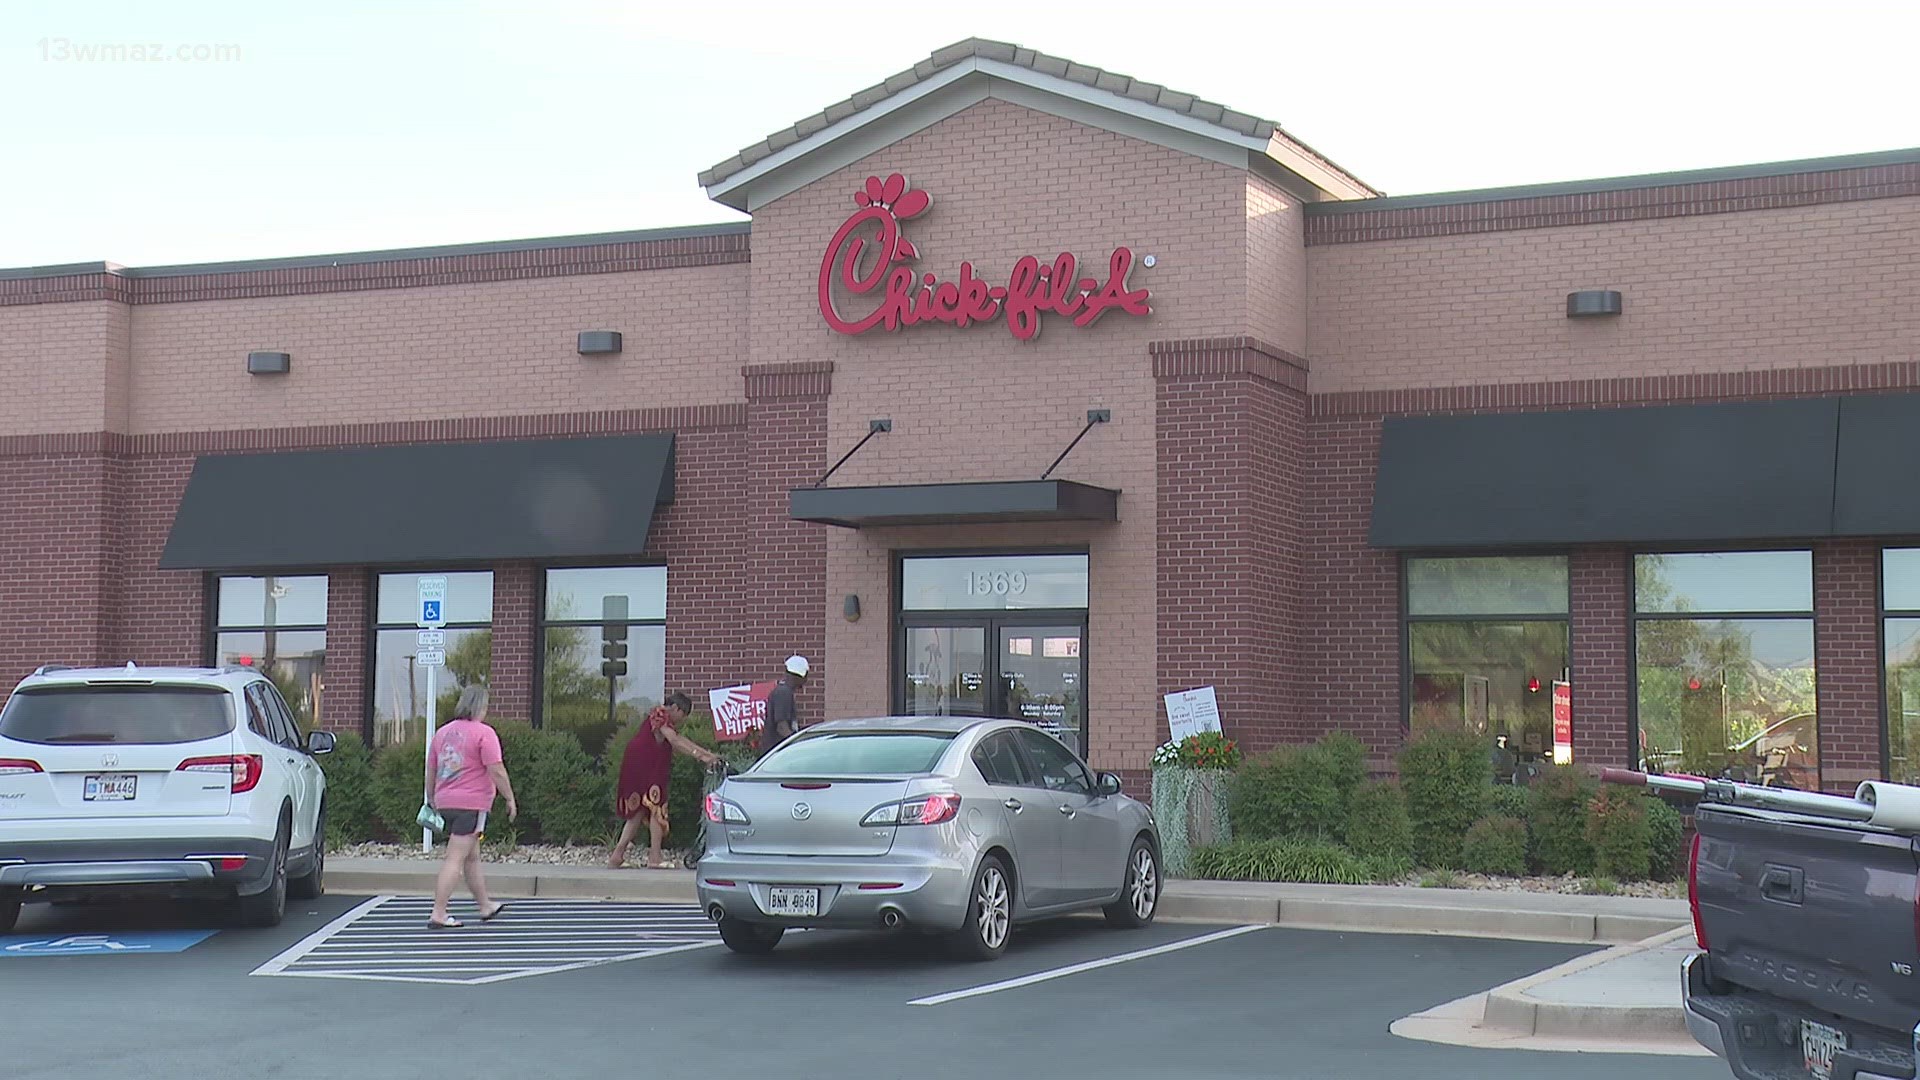 It is one of many Central Georgia Chick-fil-A's that have undergone renovations recently. In another nearby town, a new Chick-fil-A was recently announced.